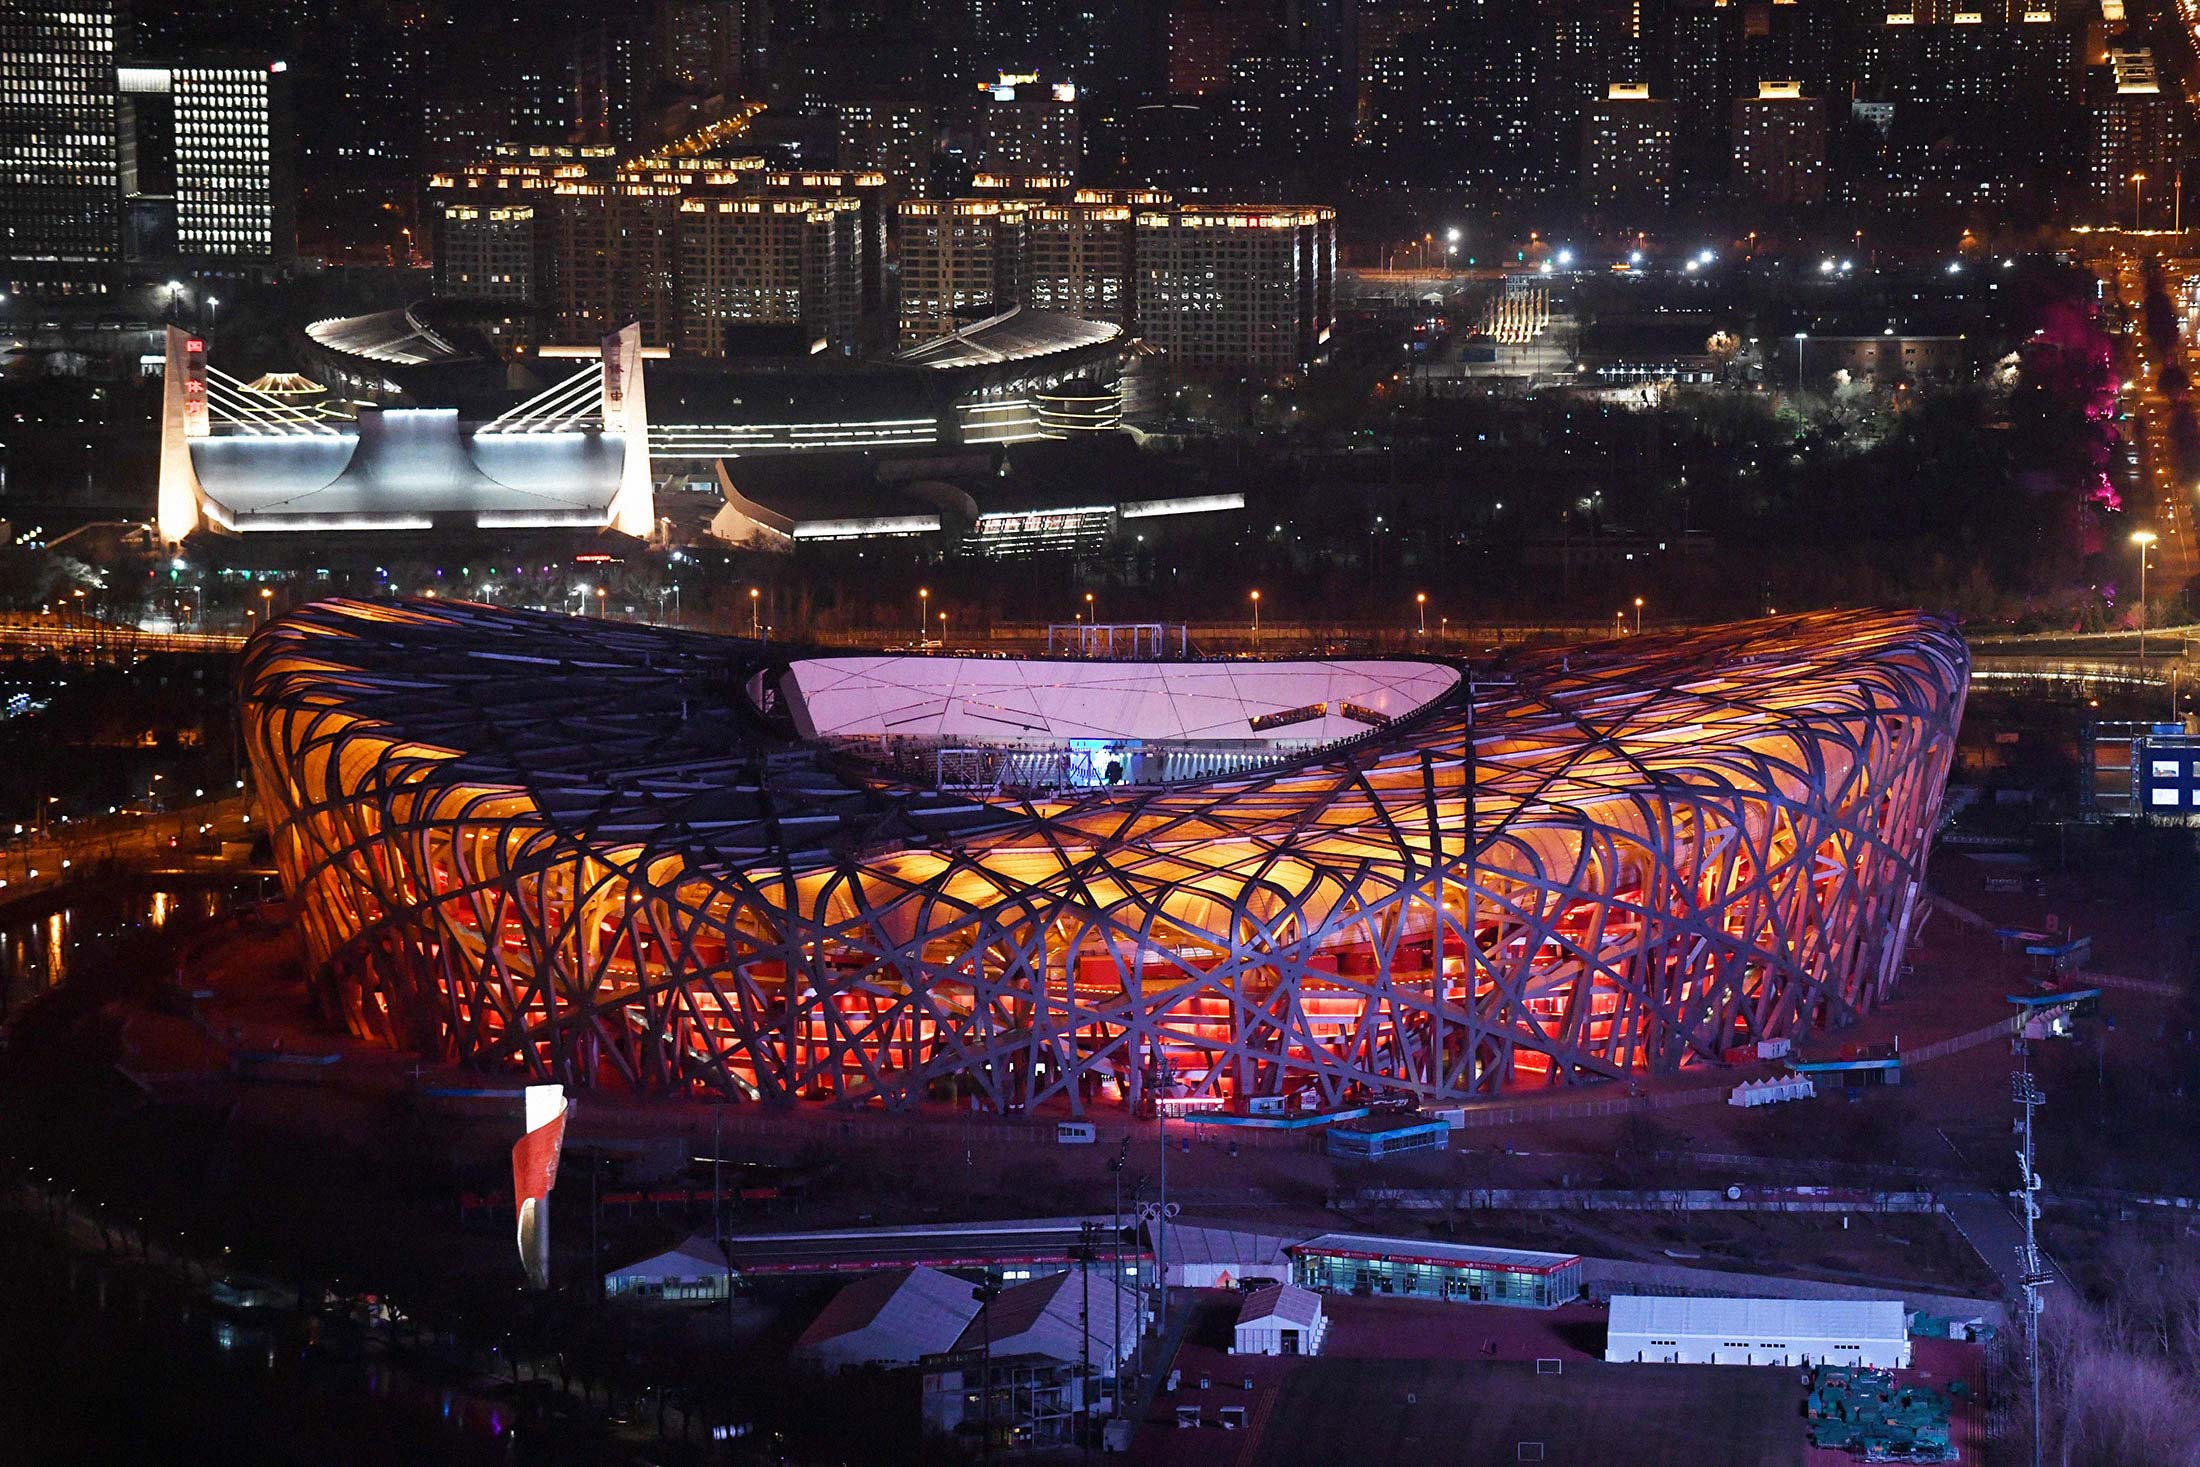 The National Stadium, known as the Bird’s Nest, which will be used for opening and closing ceremonies at the 2022 Winter Olympic Games.